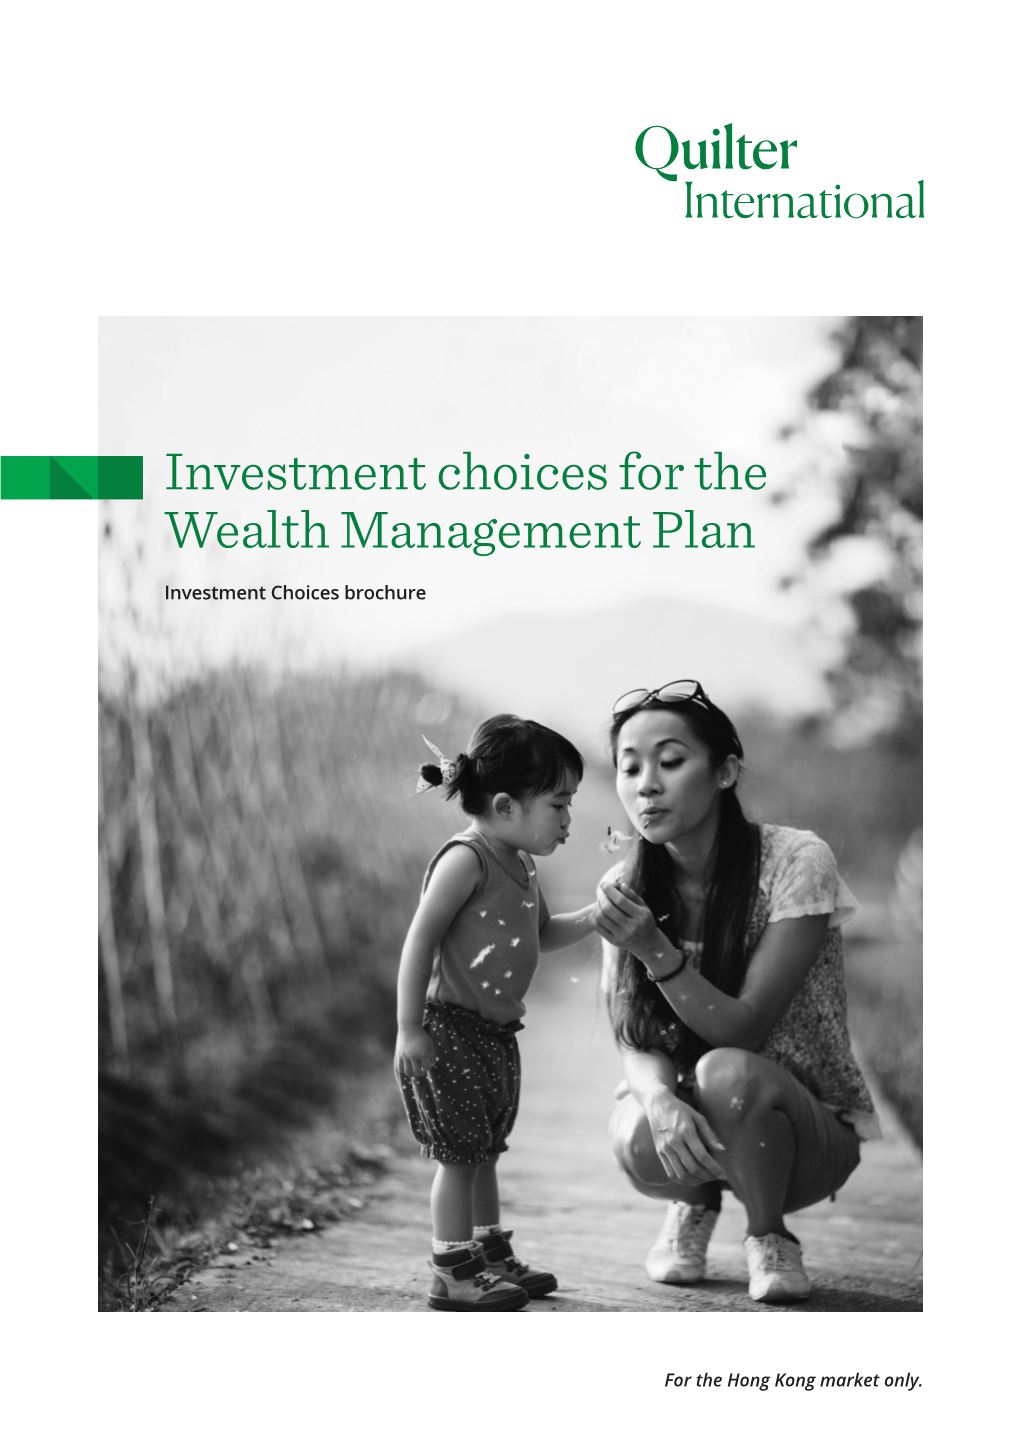 Investment Choices for the Wealth Management Plan